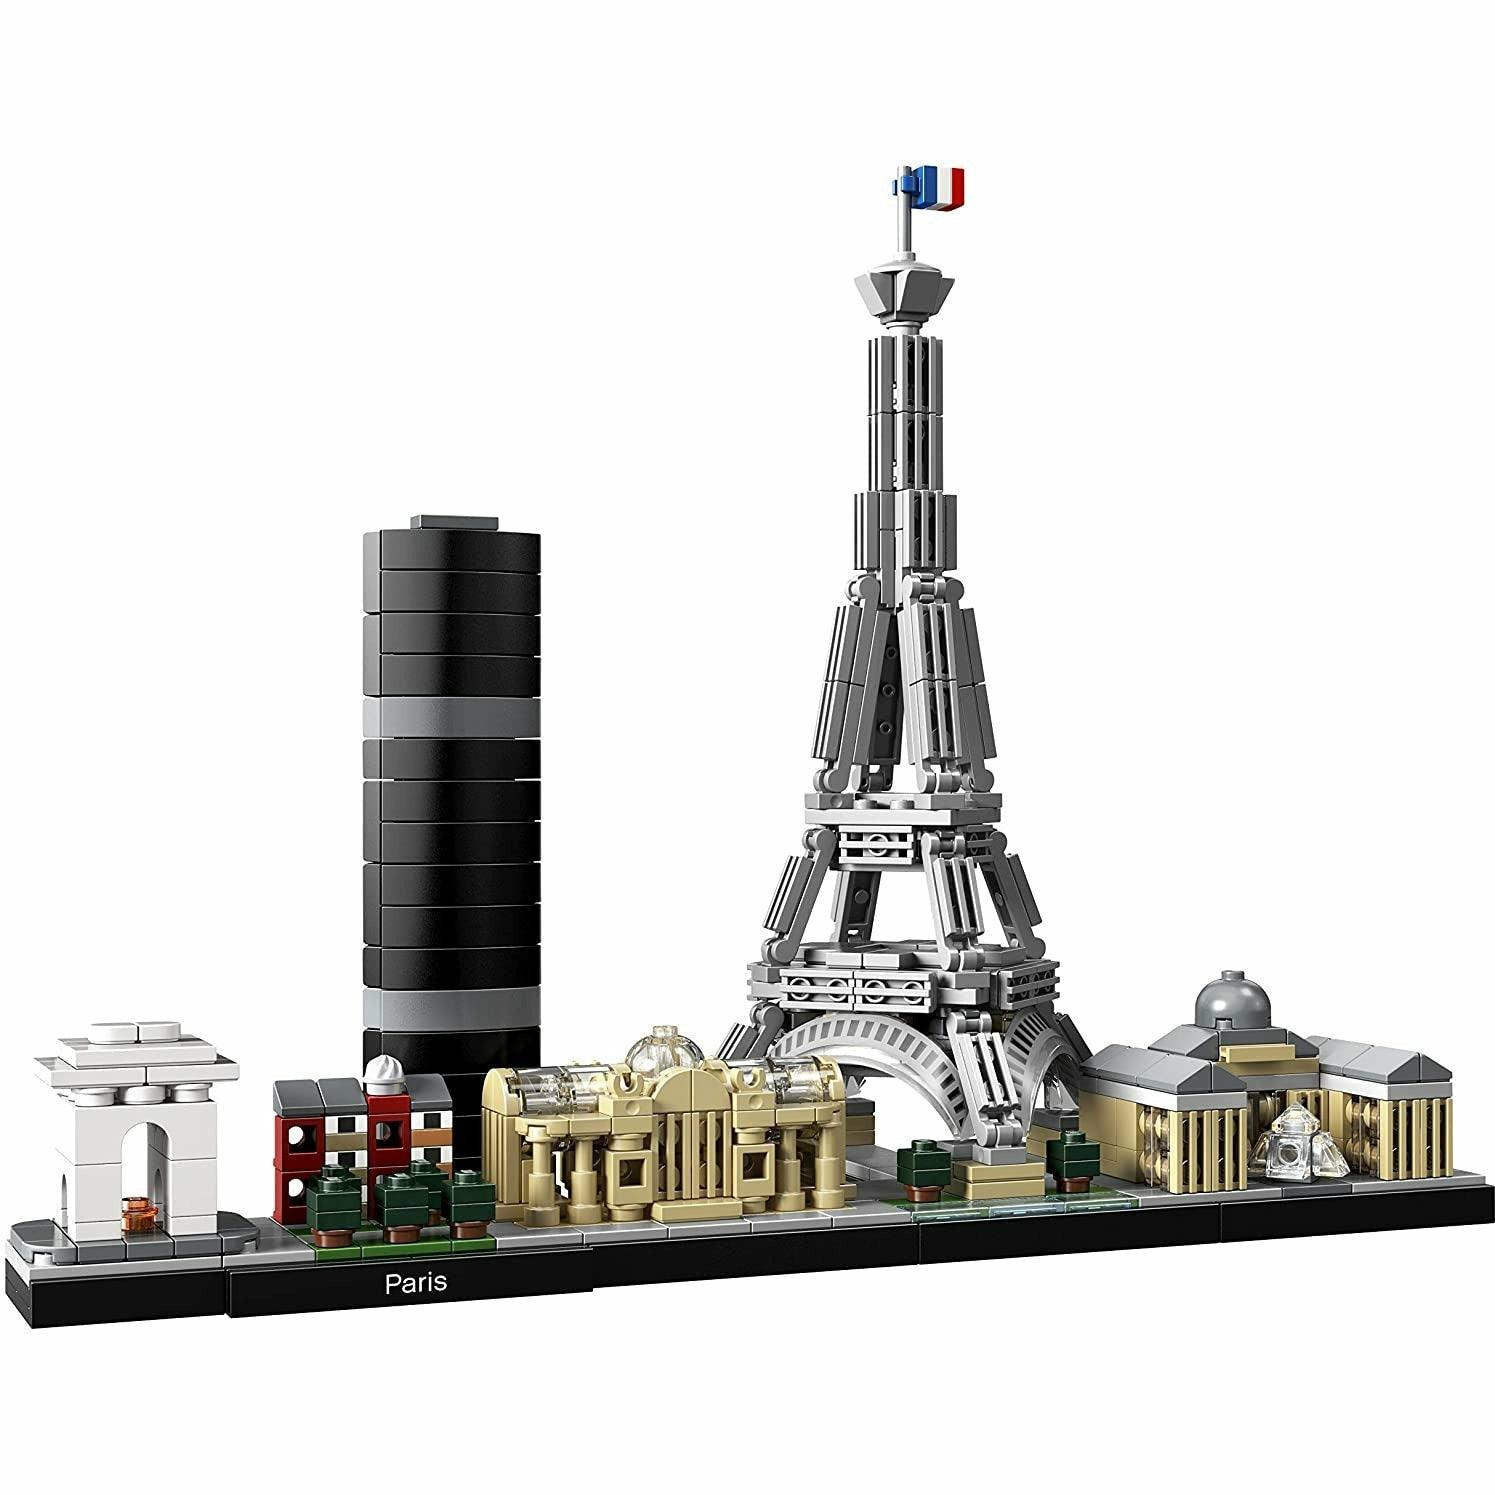 LEGO Architecture Skyline Collection 21044 Paris Skyline Building Kit with Eiffel Tower Model and Other Paris City (649 Pieces) - BumbleToys - 18+, Architecture, Boys, Friends, LEGO, OXE, Pre-Order